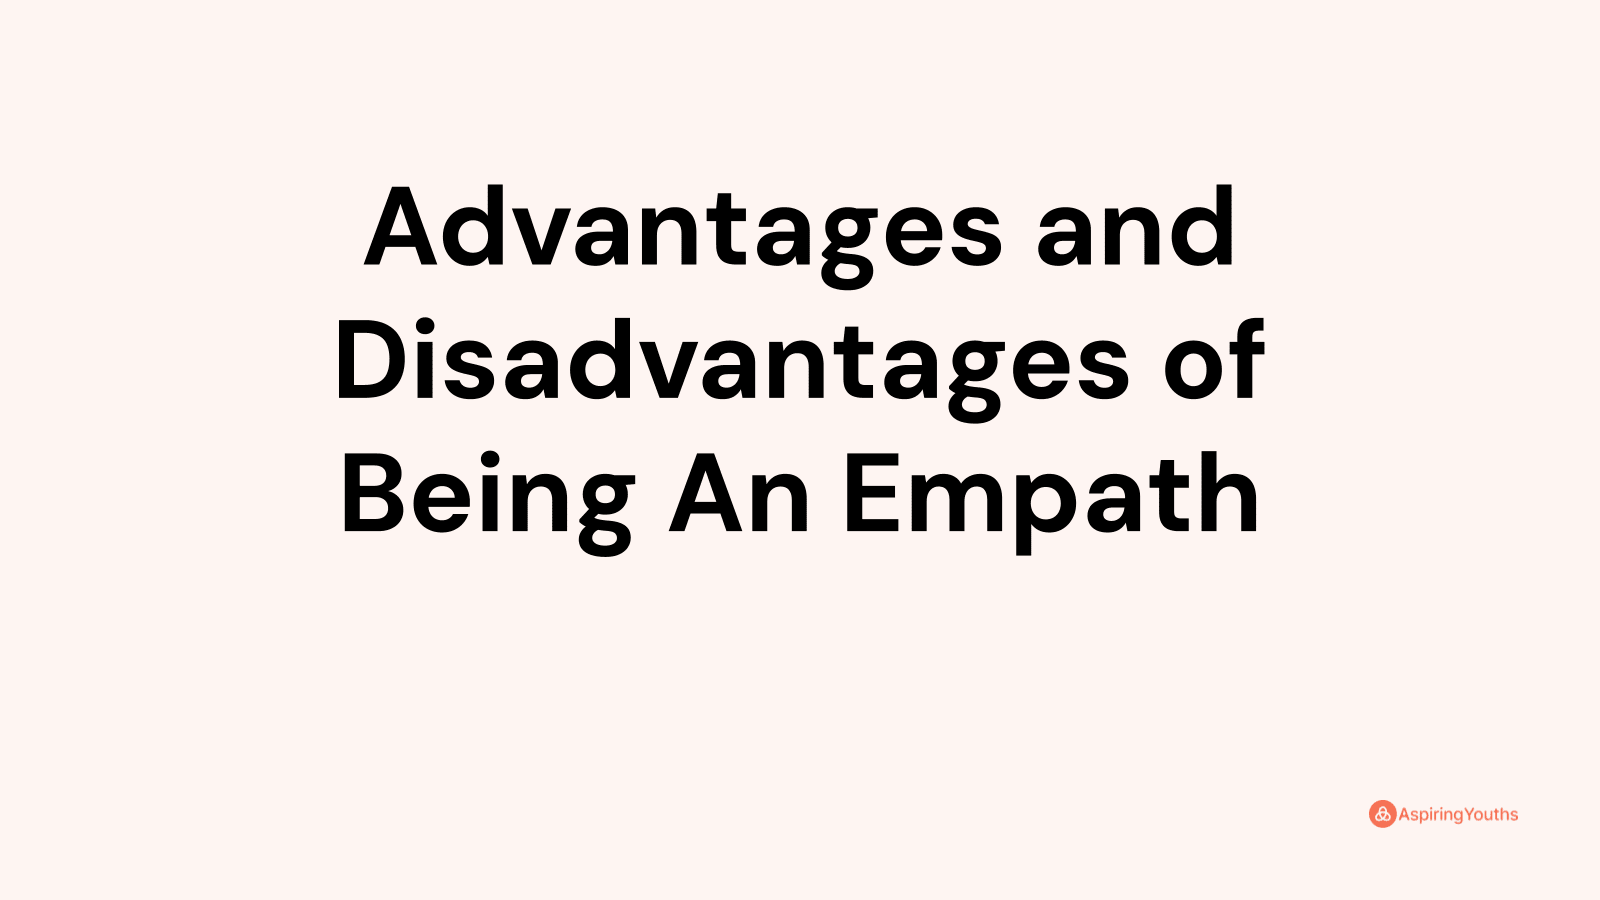 Advantages and disadvantages of Being An Empath